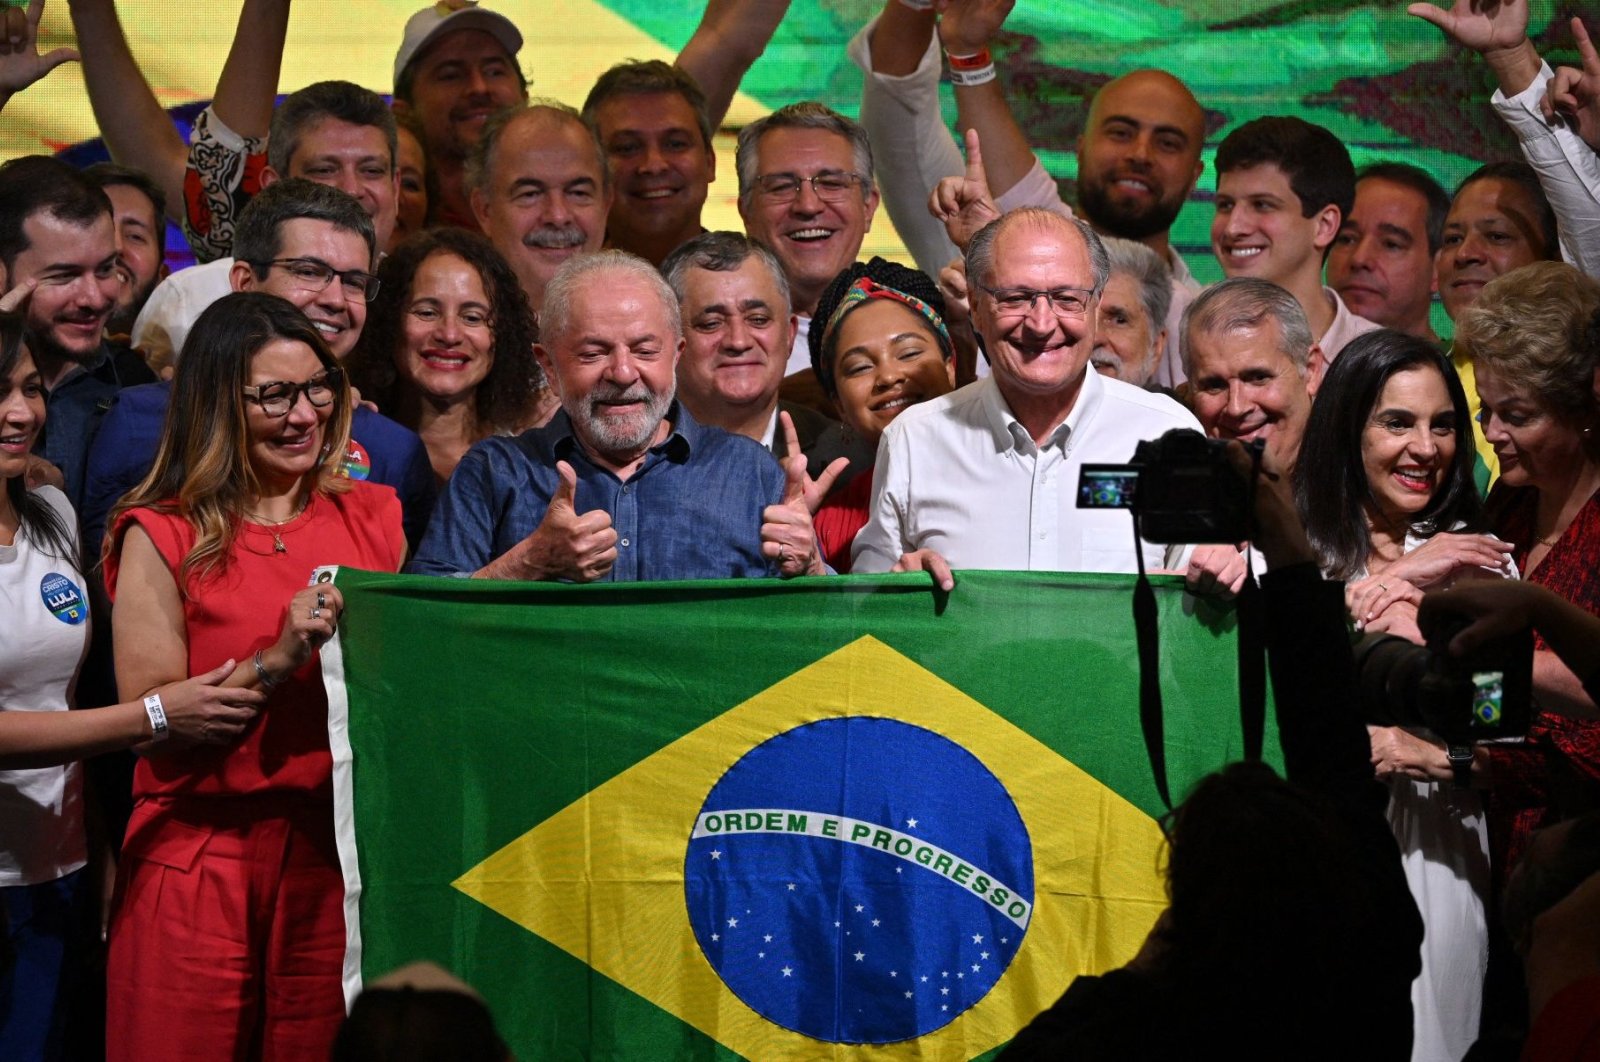  Elected president and vice president for the leftist Workers Party (PT) Luiz Inacio Lula da Silva (C) and Geraldo Alckmin (R) celebrate after winning the presidential run-off election, in Sao Paulo, Brazil, on Oct. 30, 2022. (AFP Photo)